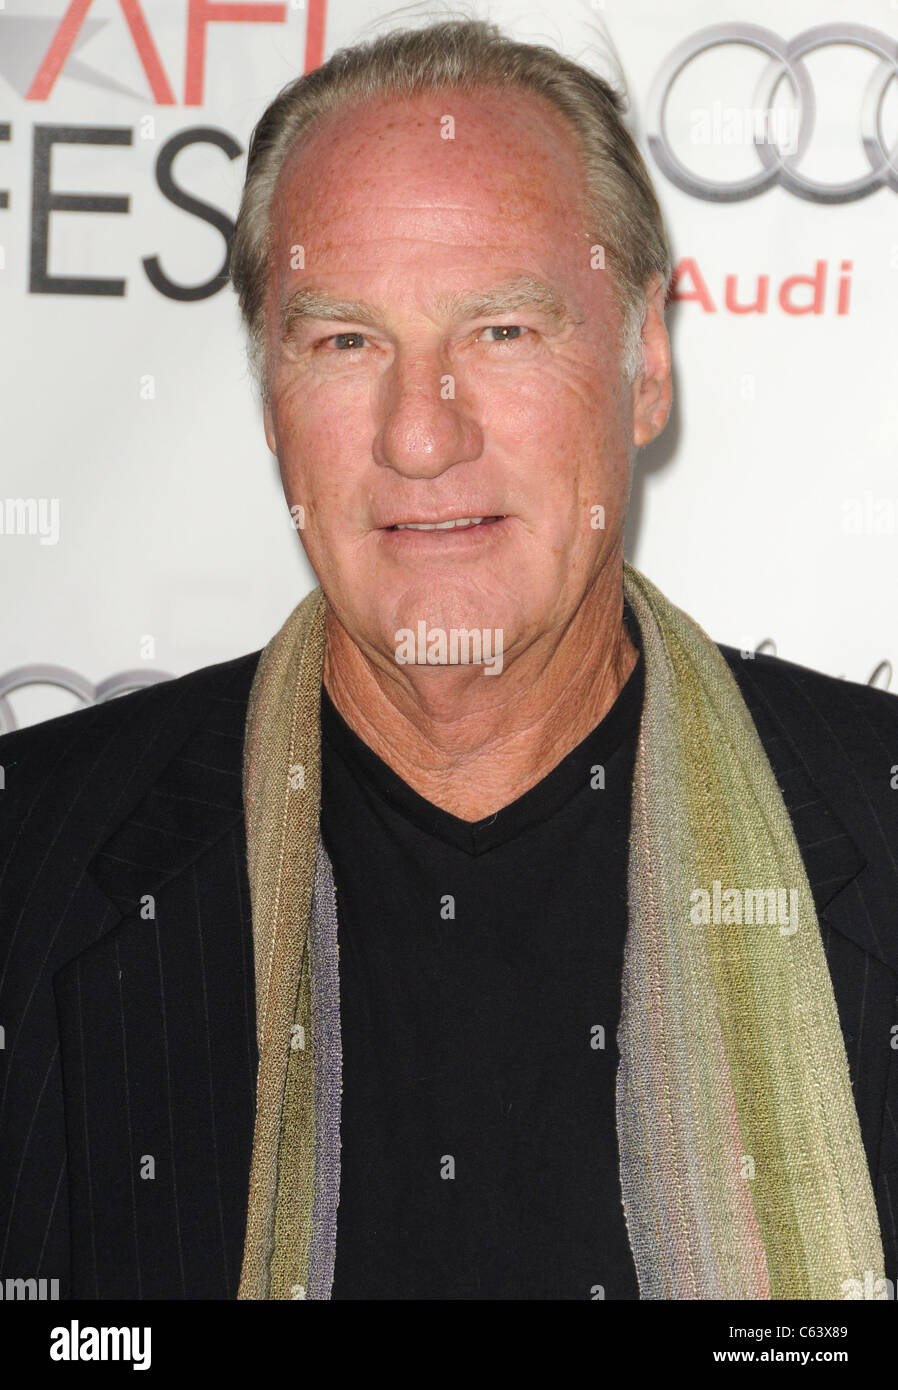 THE INCREDIBLES [US 2004] CRAIG T. NELSON voices Bob Parr / Mr. Incredible  Date: 2004 Stock Photo - Alamy